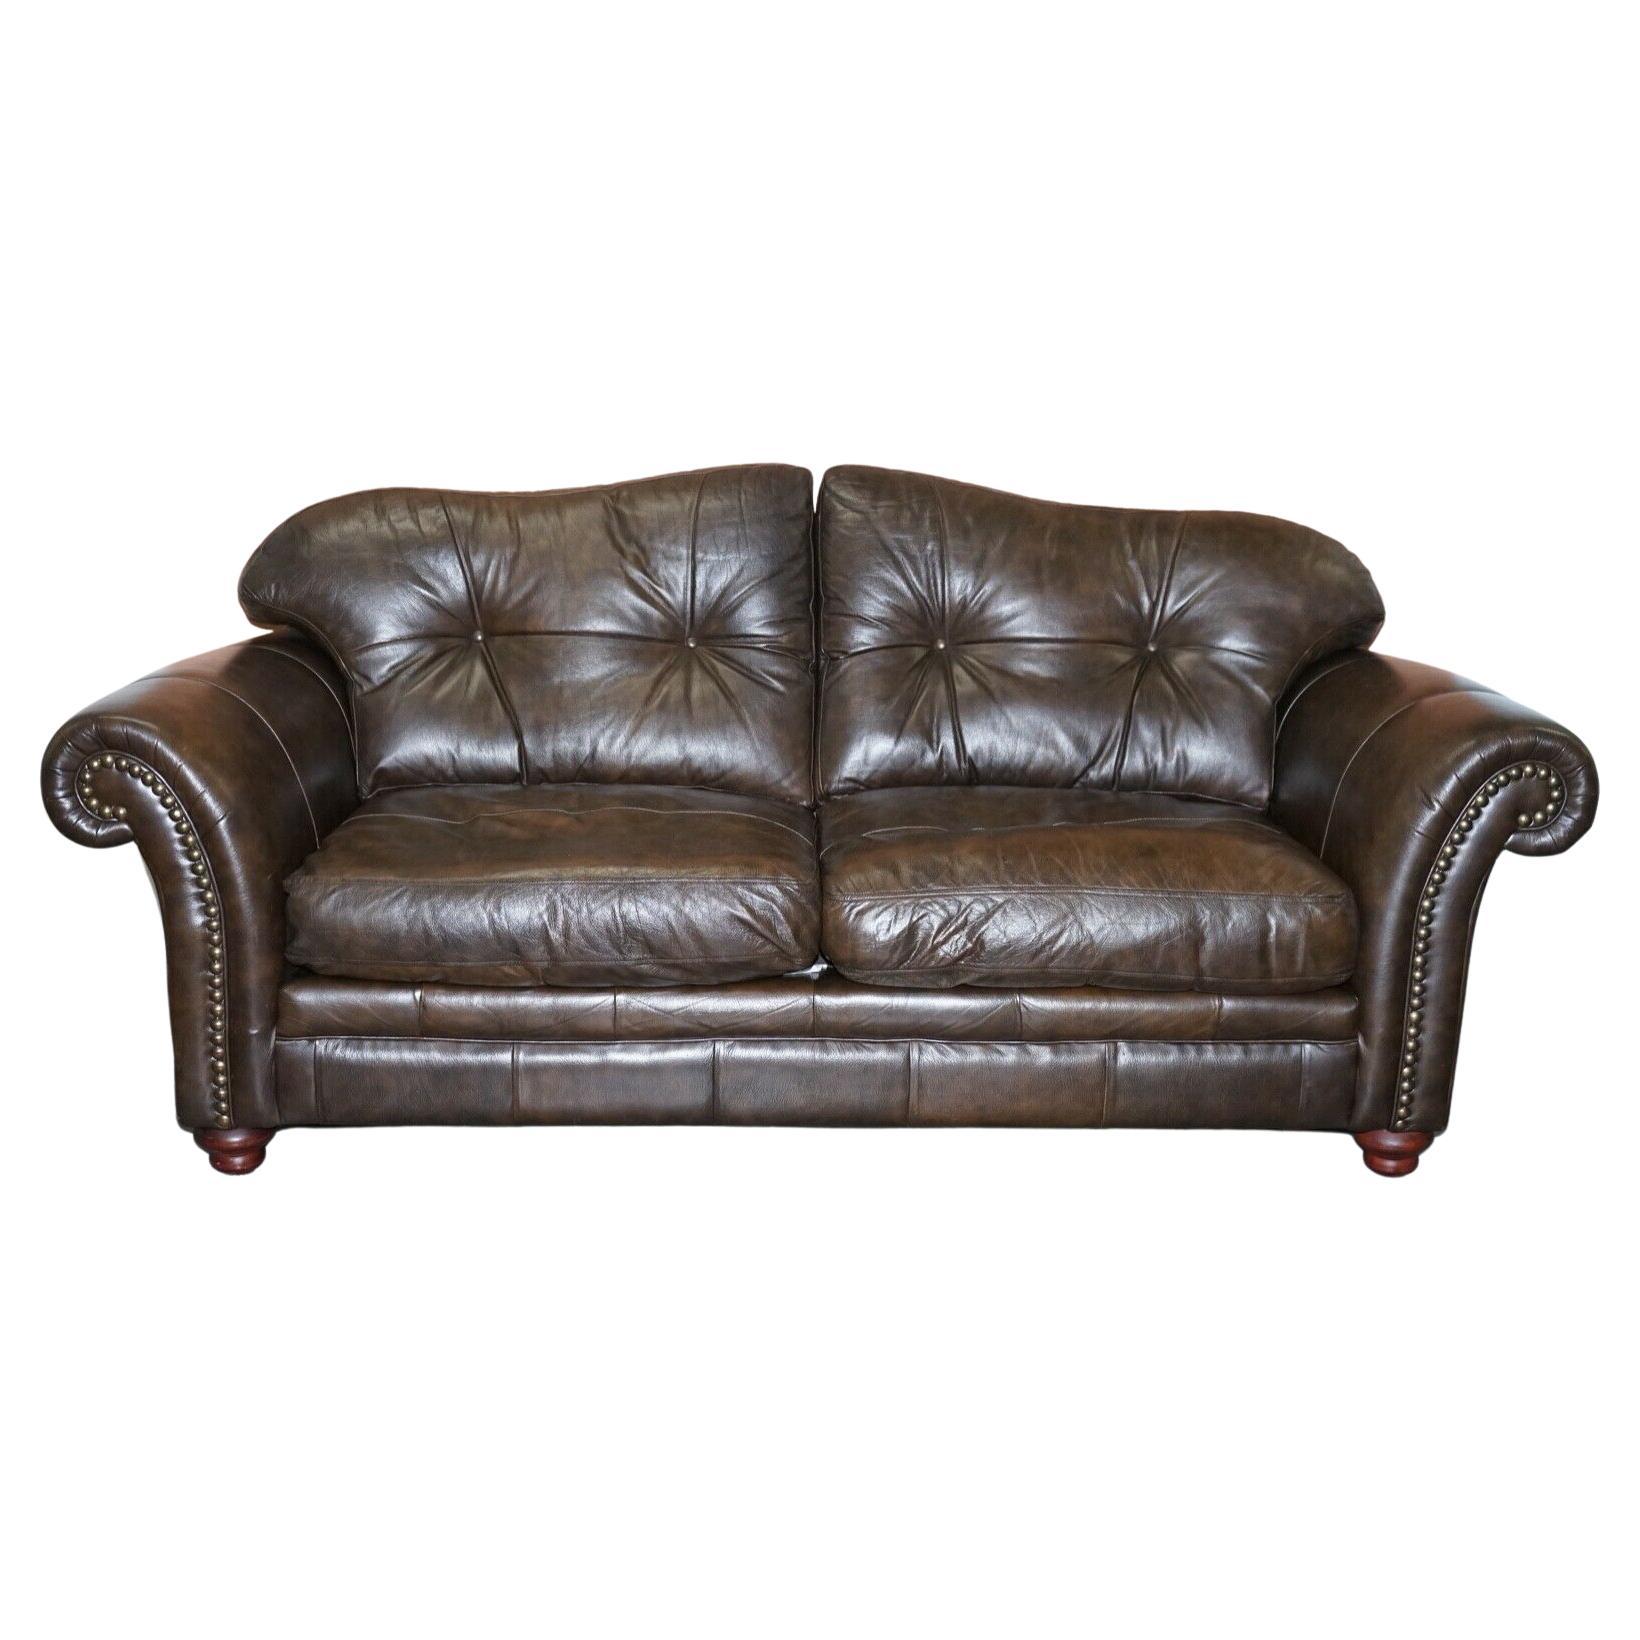 Lovely Tetrad Brown Leather 2 Seater Chesterfield Sofa with Scroll Arms